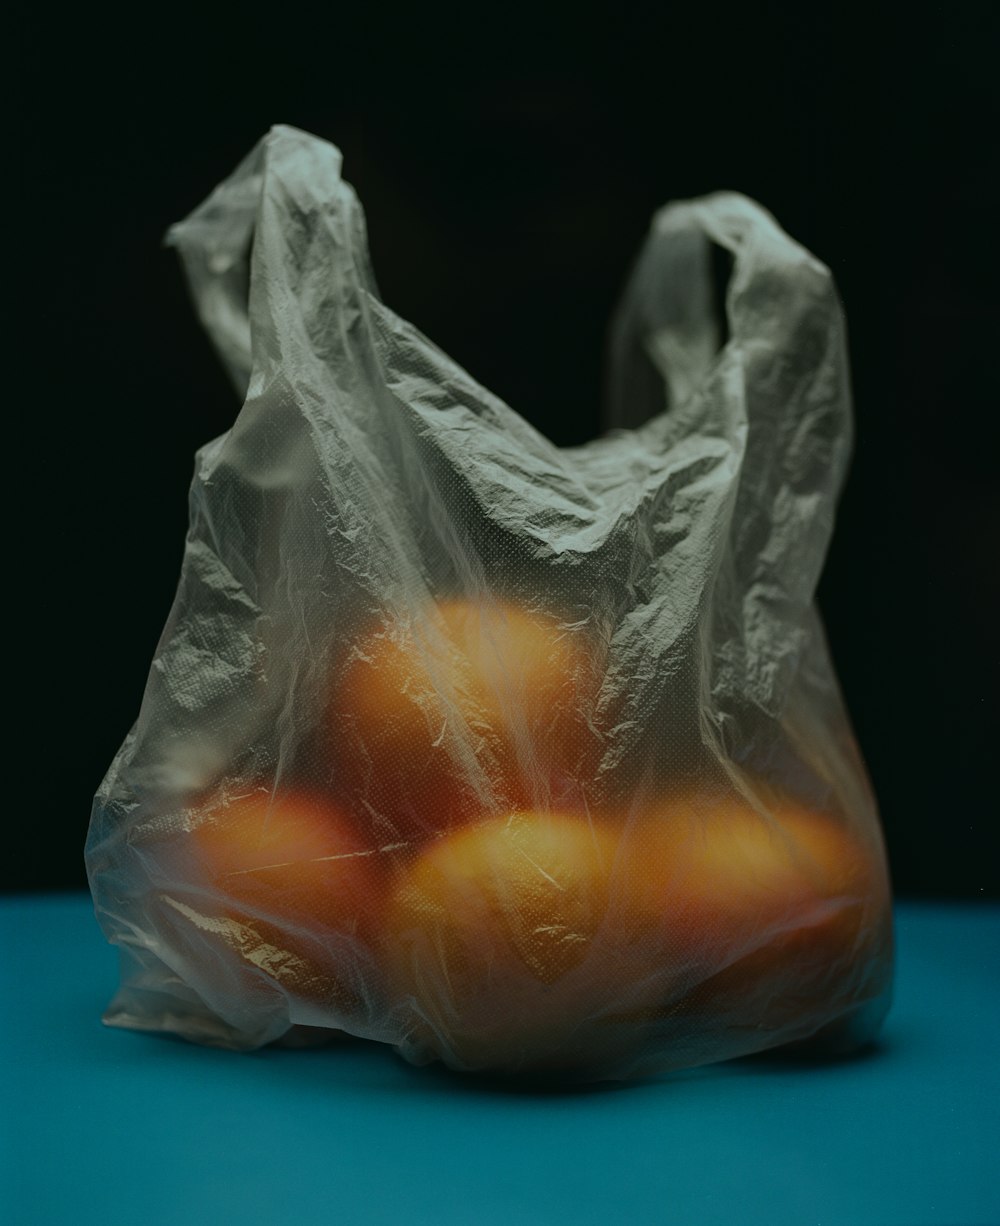 a plastic bag filled with oranges on a blue surface